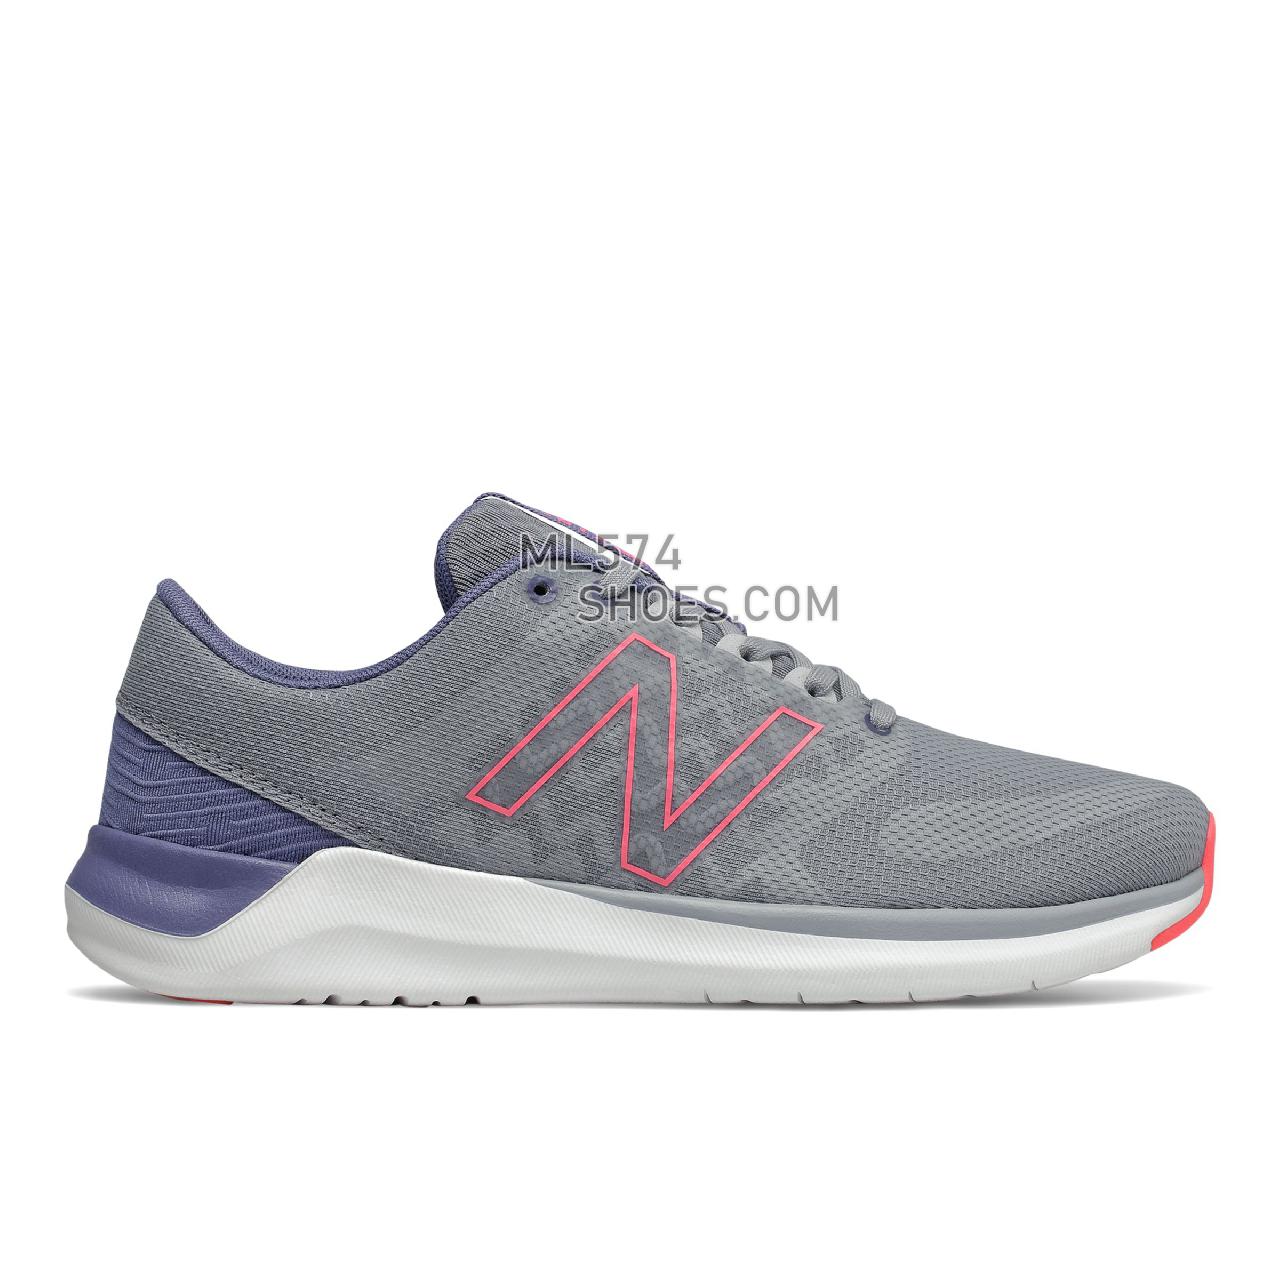 New Balance 715v4 - Women's Workout - Steel with Guava and Magnetic Blue - WX715CG4